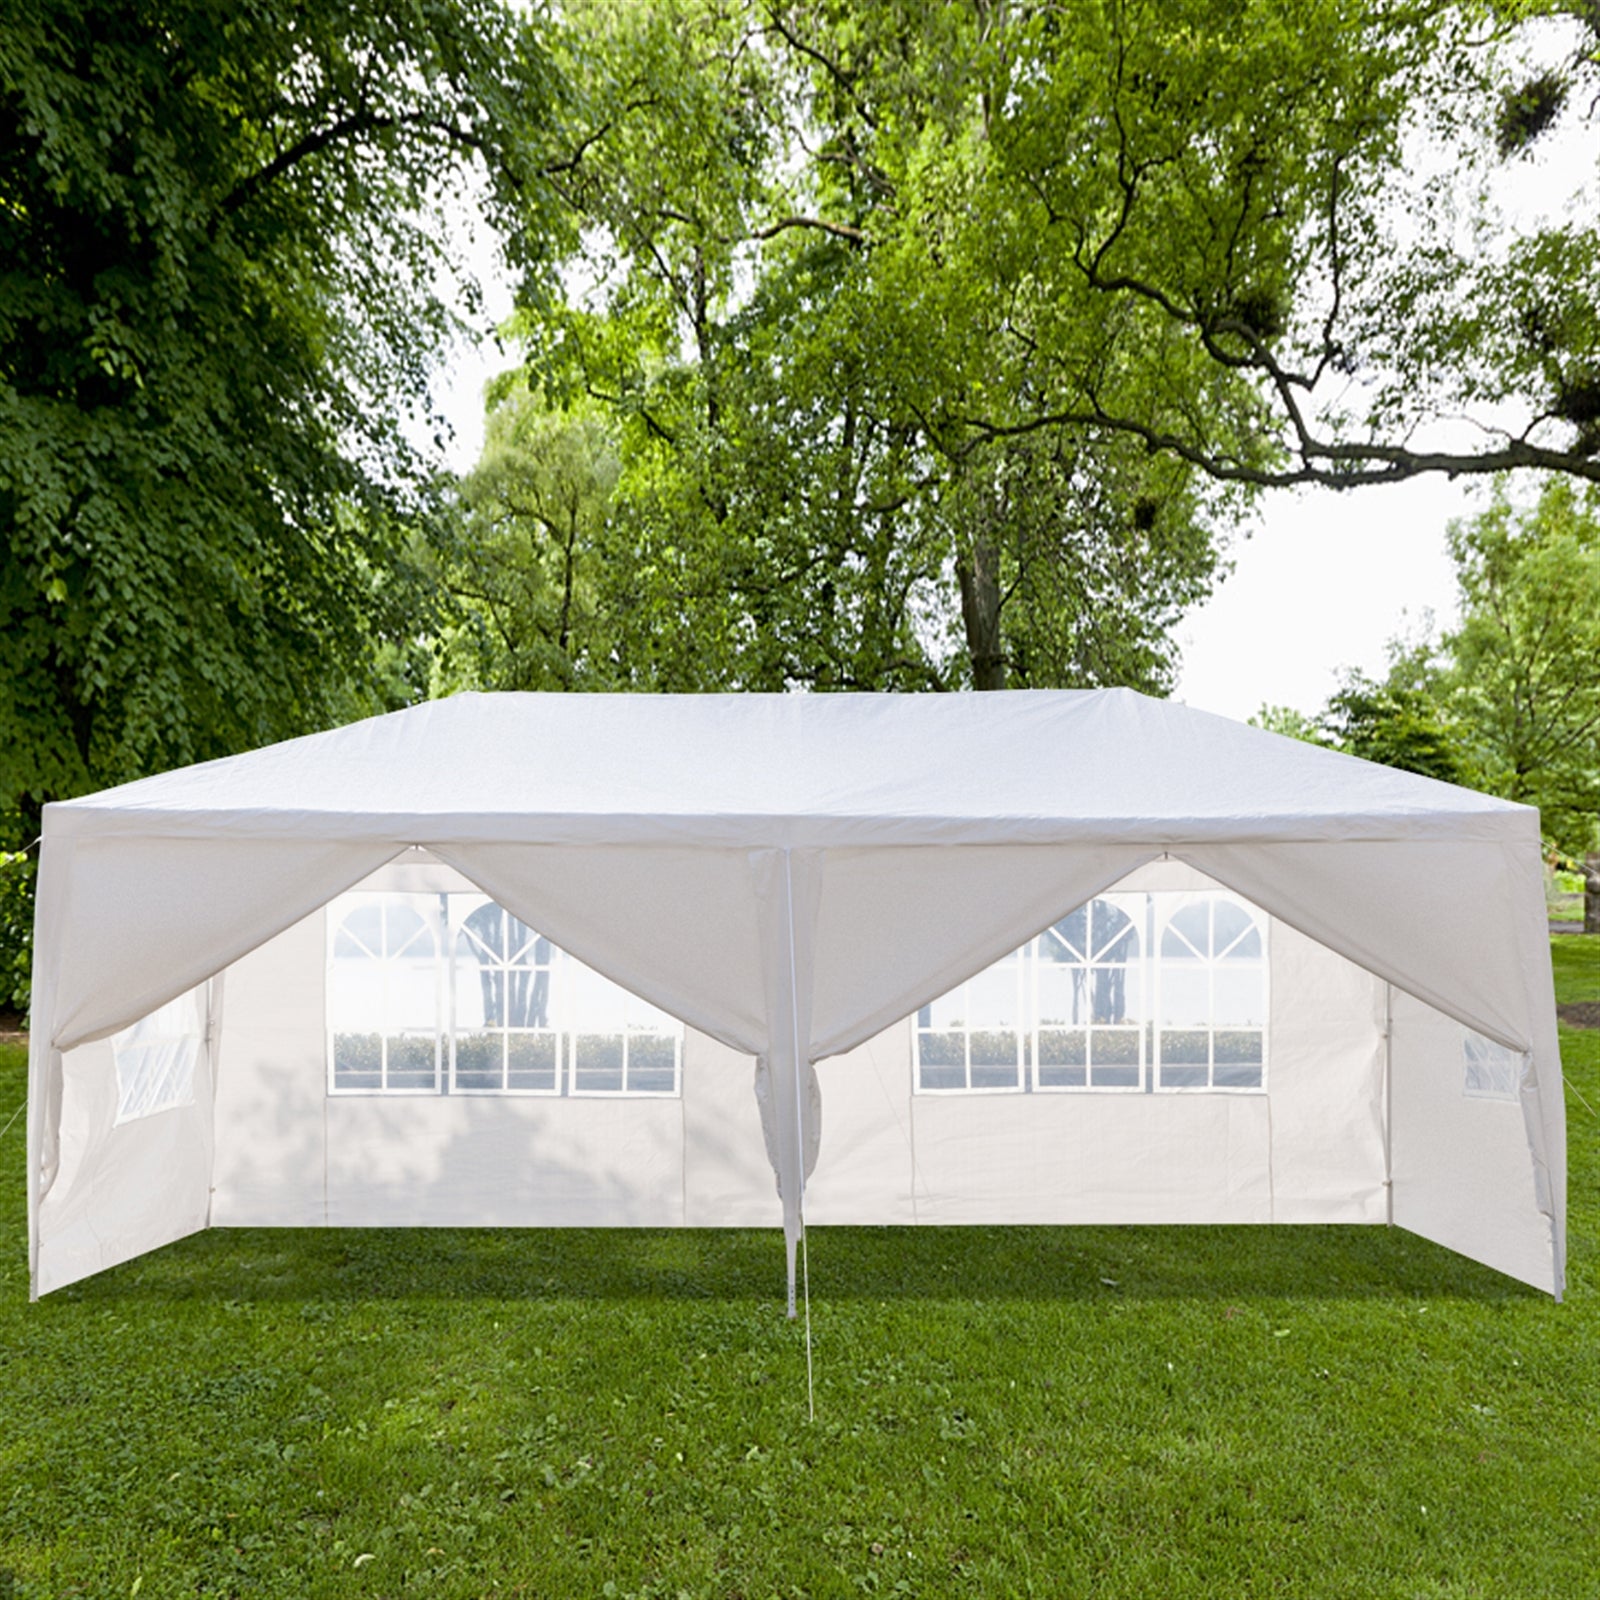 ZNTS 3 x 6m Six Sides Two Doors Waterproof Tent with Spiral Tubes White 13319883